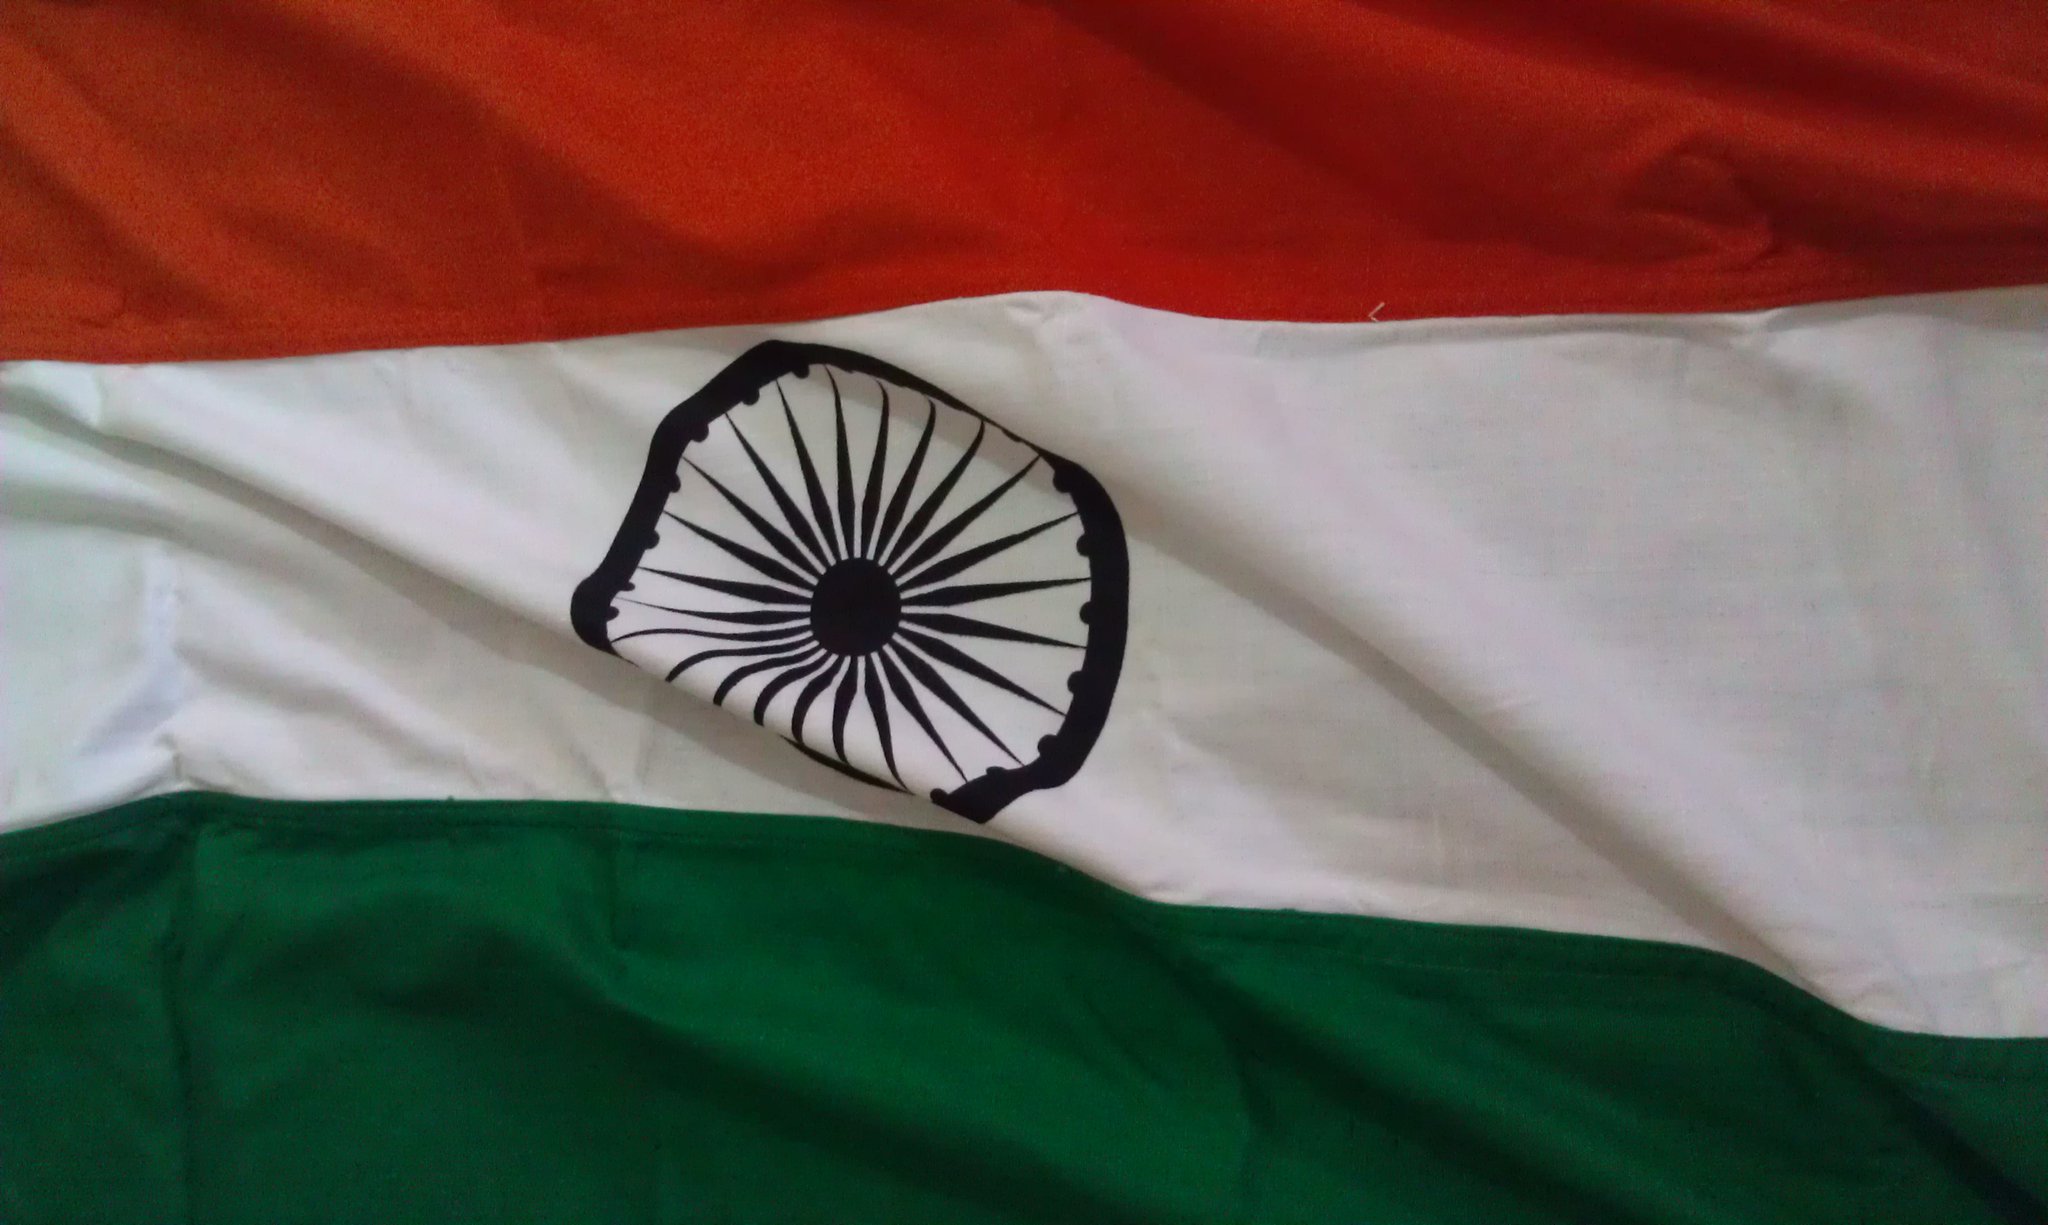 Khadi Gram Udyog records huge drop in Tri-Colour Flag order this Independence day 